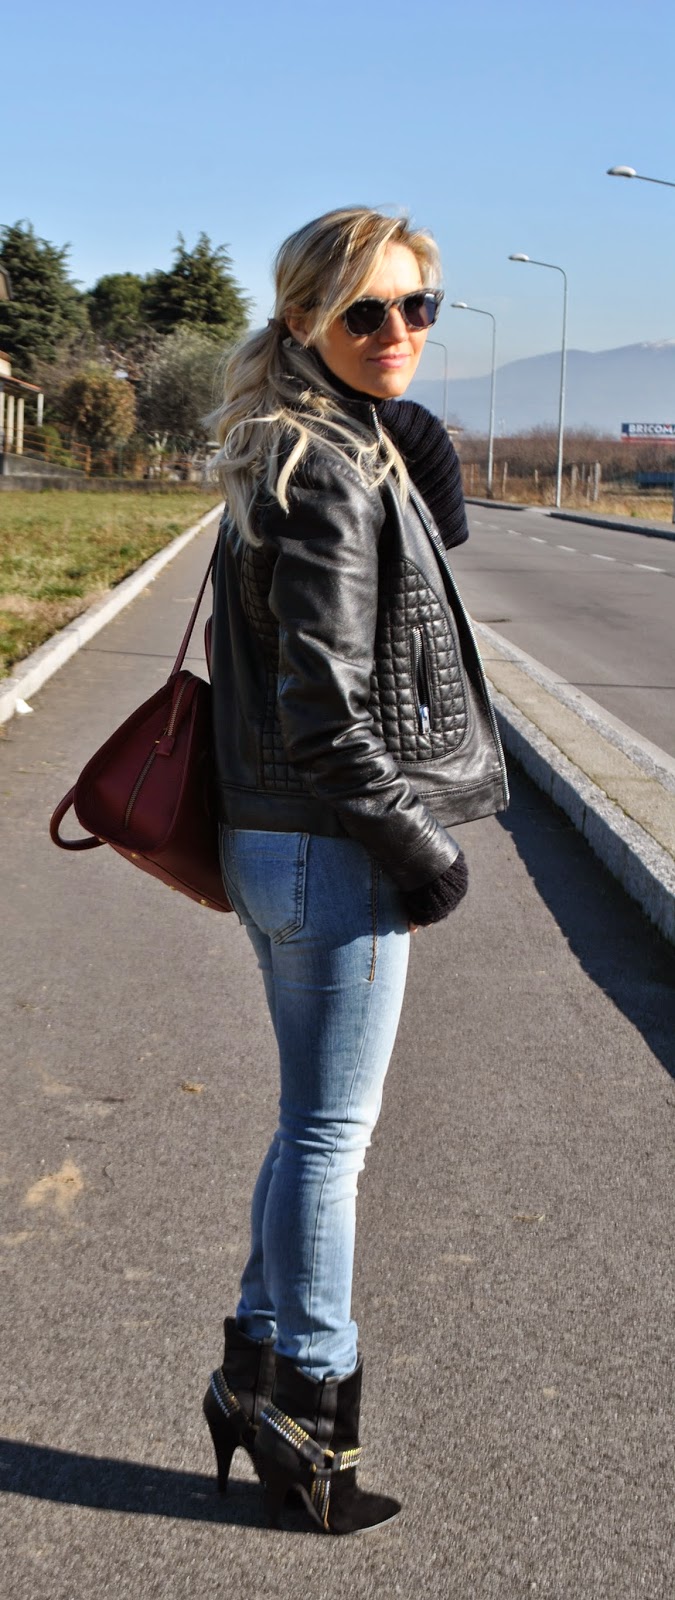 outfit jeans tacchi e giacca nera di pelle outfit felpa mickey mouse felpa topolino felpa mango jeans fornarina outfit jeans skinny outfit borsa rossa abbinamenti borsa rossa outfit jeans e tacchi come abbinare jeans e tacchi outfit invernali outfit febbraio 2015 outfit casual invernali mariafelicia magno colorblock by felym mariafelicia magno fashion blogger come abbinare la giacca in pelle nera abbinamenti felpa outfit scalda collo outfit borsa rossa outfit stivali buffalo orologio gufo italy orologio in legno winter outfits sweatshirt outfit how to wear sweatshirt skinny jeans how to wear skinny jeans how to wear red bag outfit red bag skinny jeans outfit red bag outfit mango sweatshirt mickey mouse sweatshirt buffalo boots how to wear jeans and heels casual winter outfits fashion bloggers italy italian fashion bloggers blonde hair blonde girls 